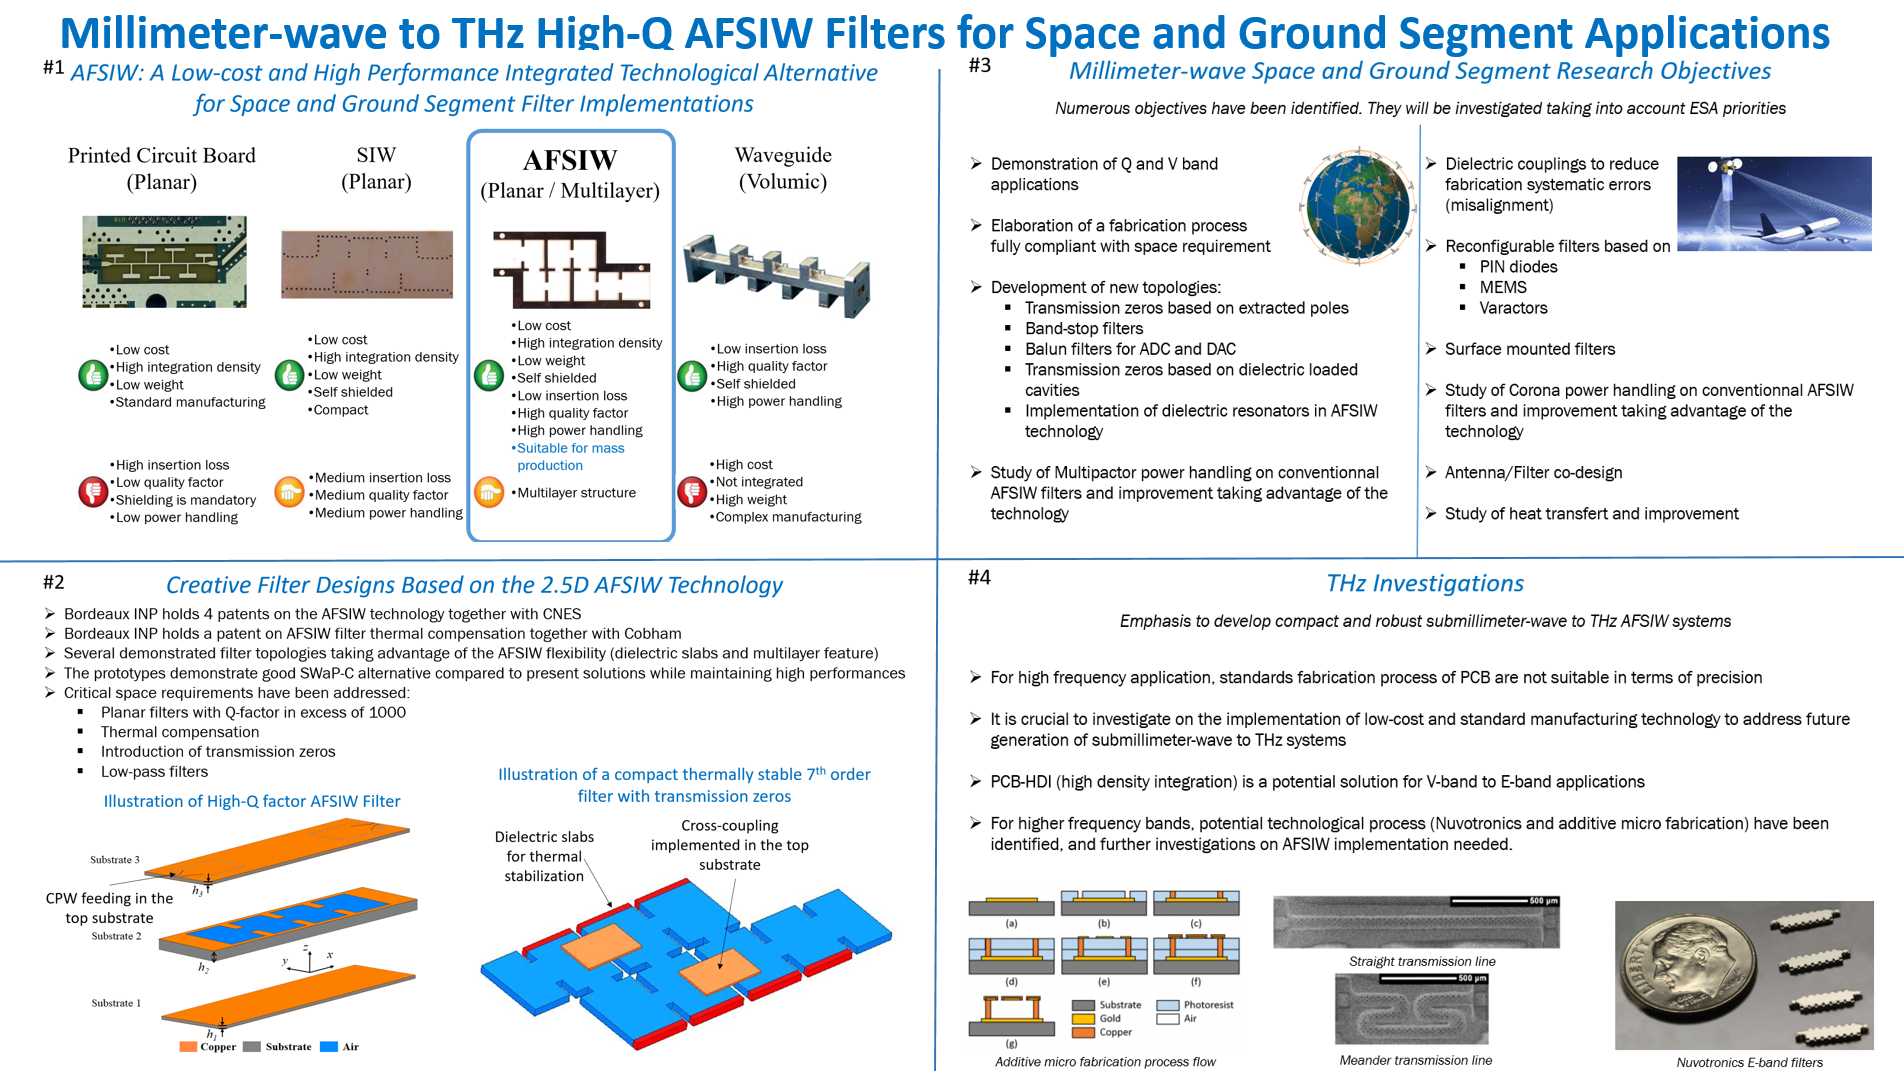 Millimeter-wave to THz High-Q AFSIW Filters for Space and Ground Segment Applications